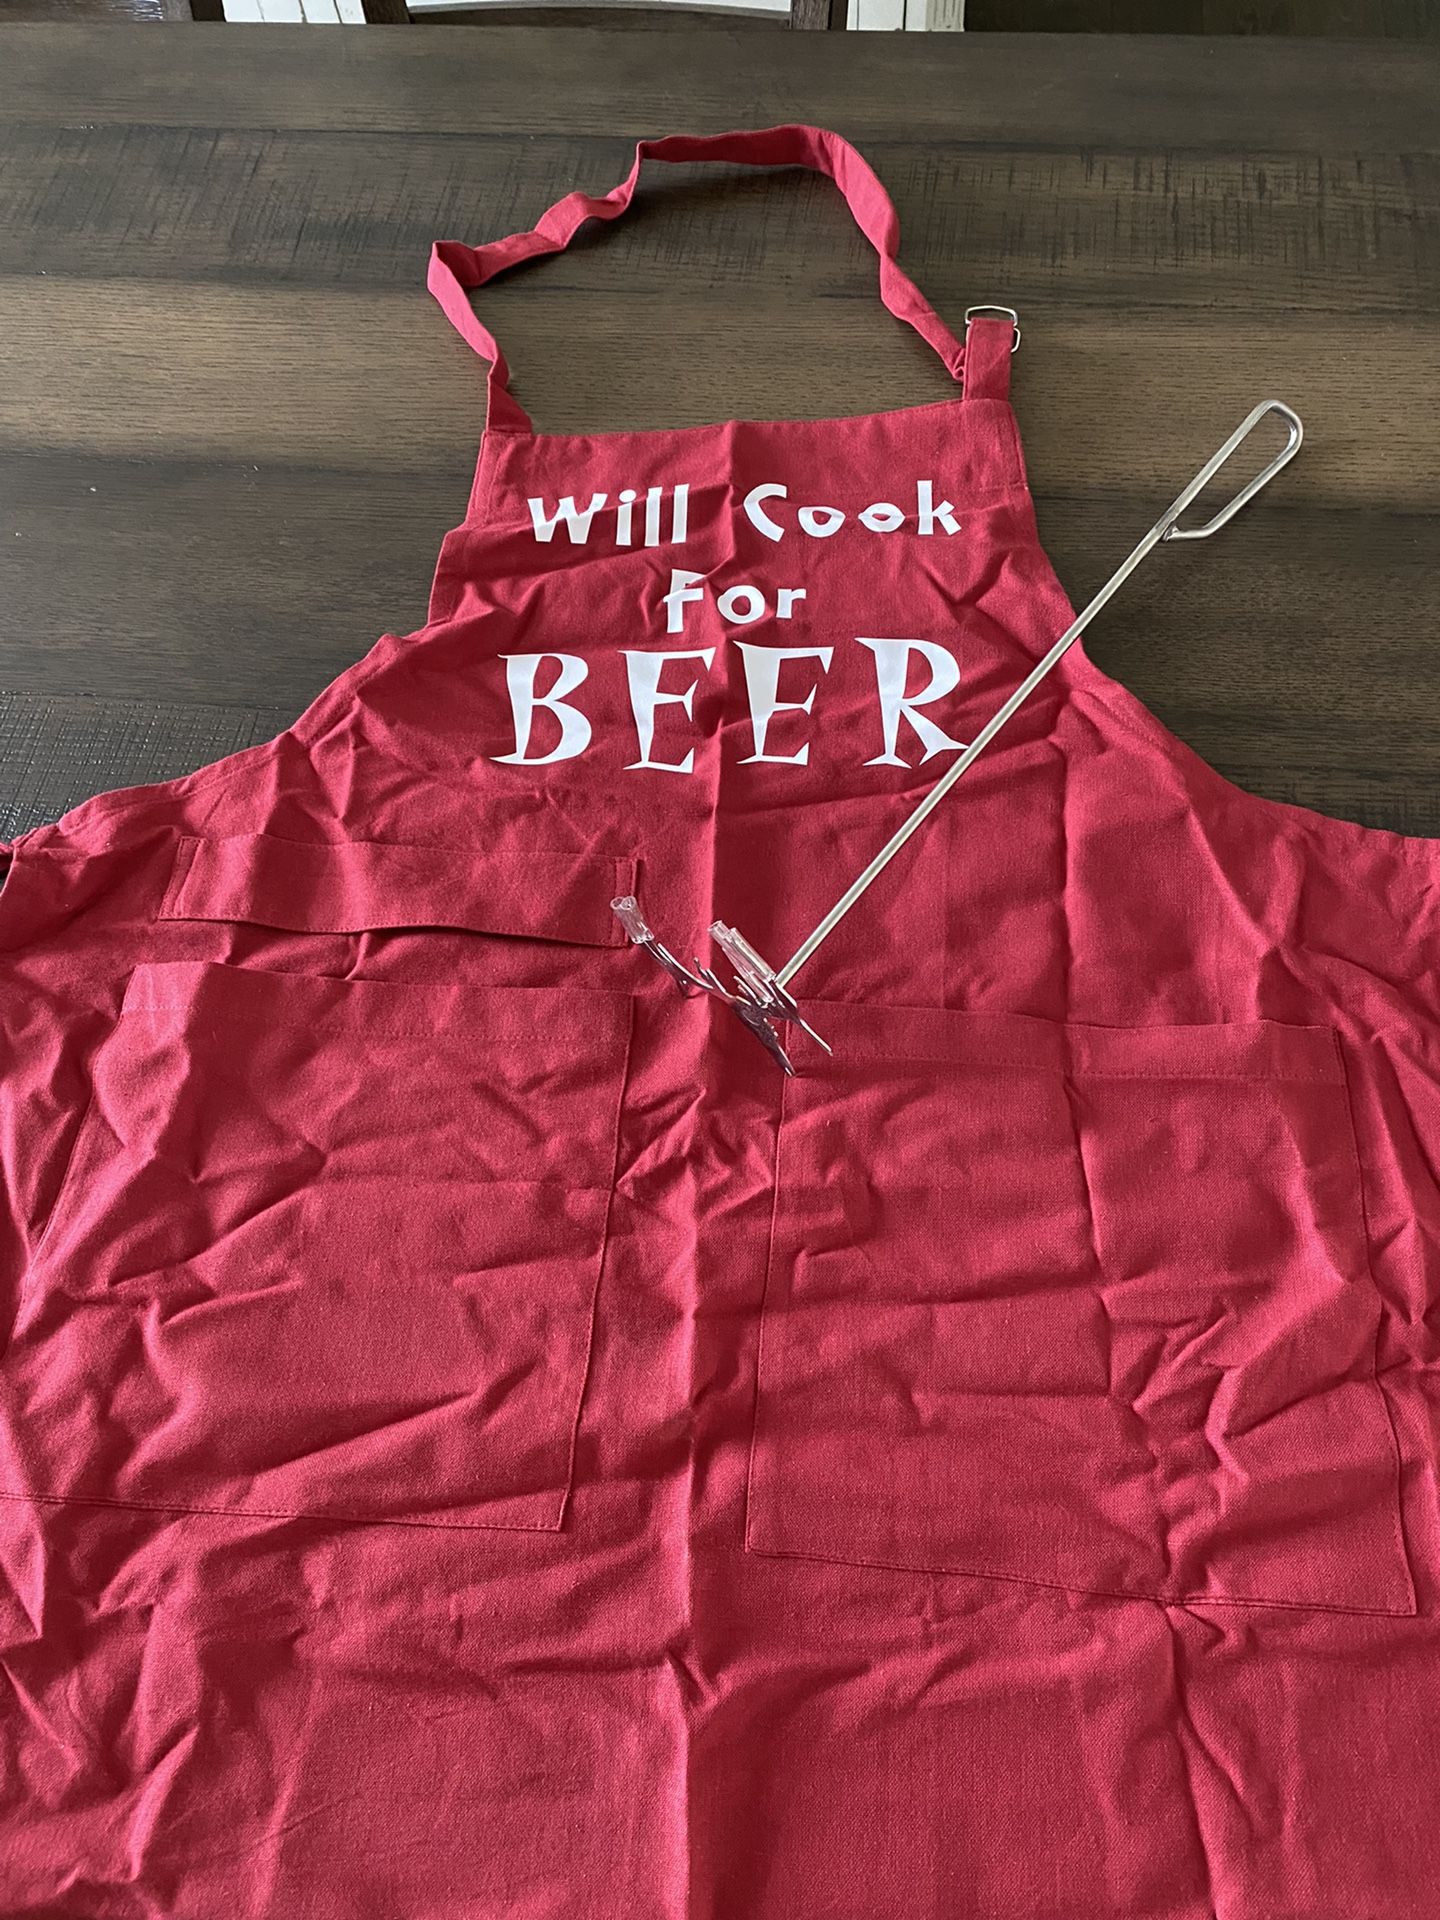 Grilling Apron and Elk Head BBQ tool / brand